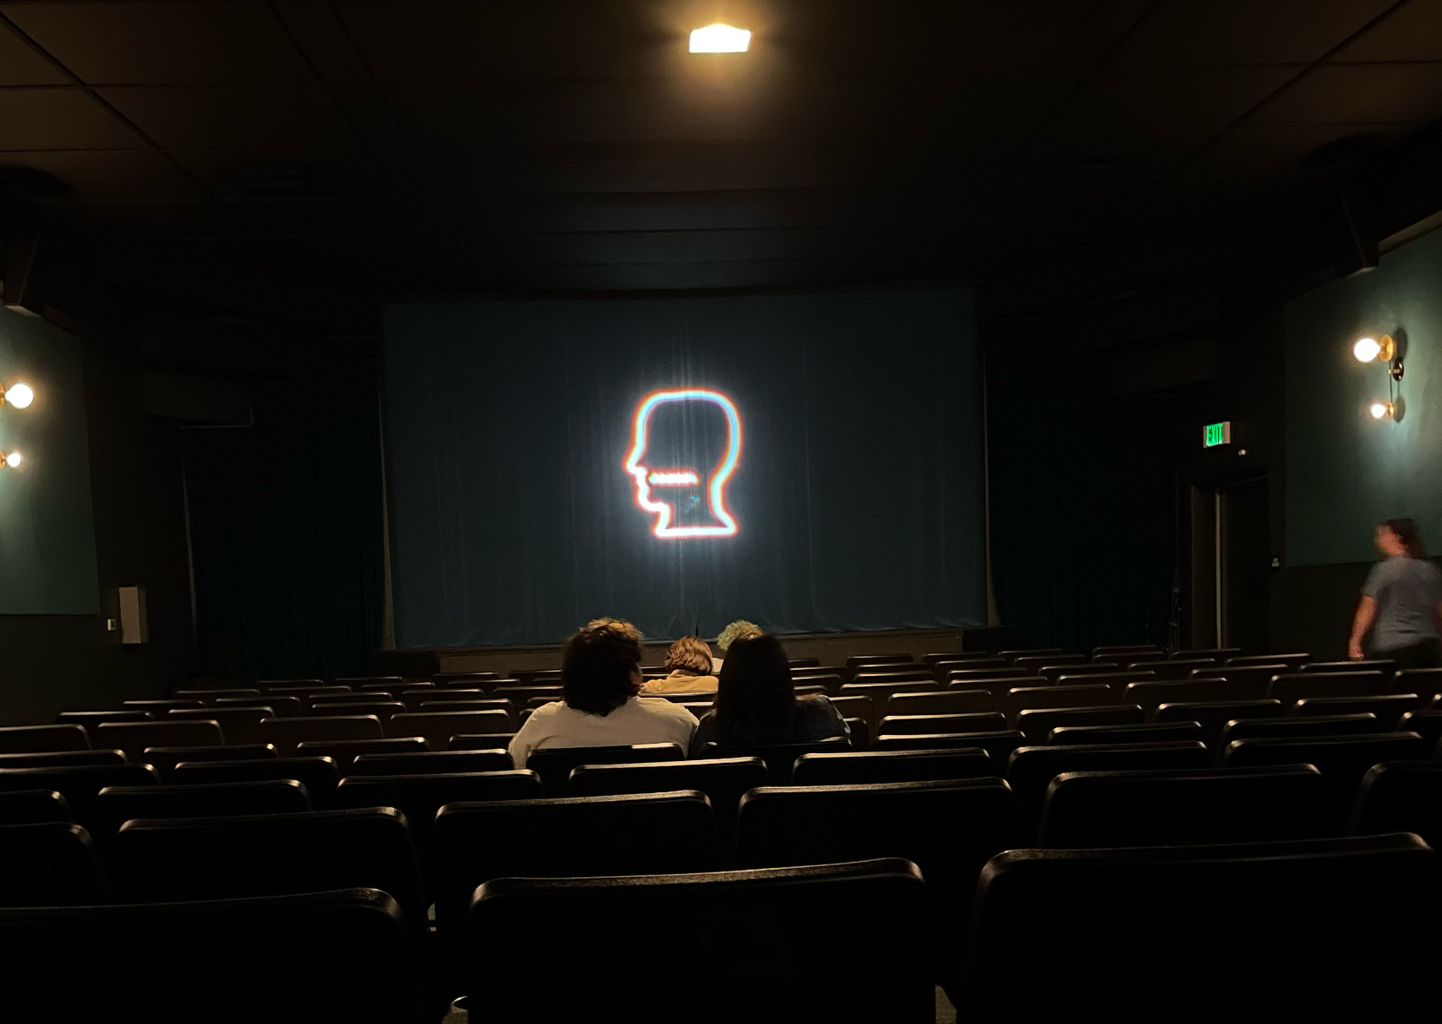 Dark movie theater with a black stage and a side profile silhouette projected onto it.